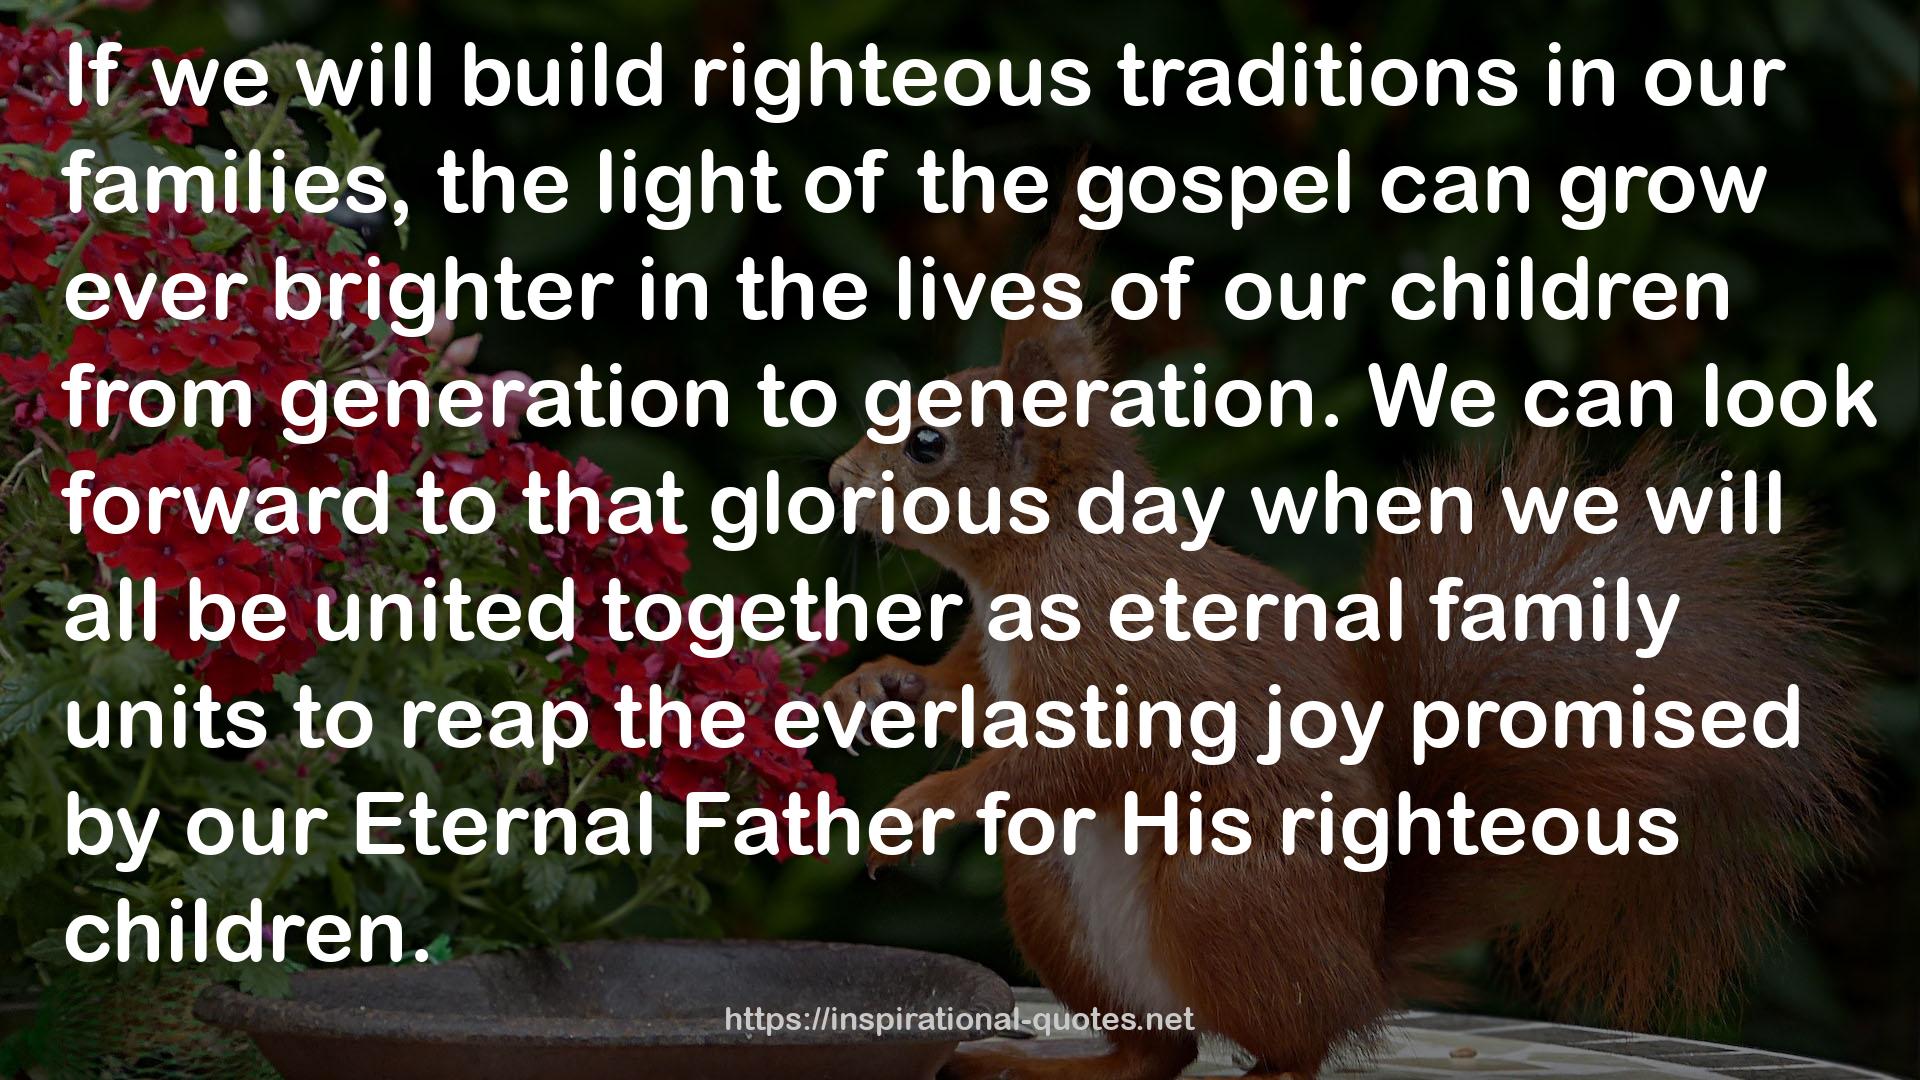 righteous traditions  QUOTES